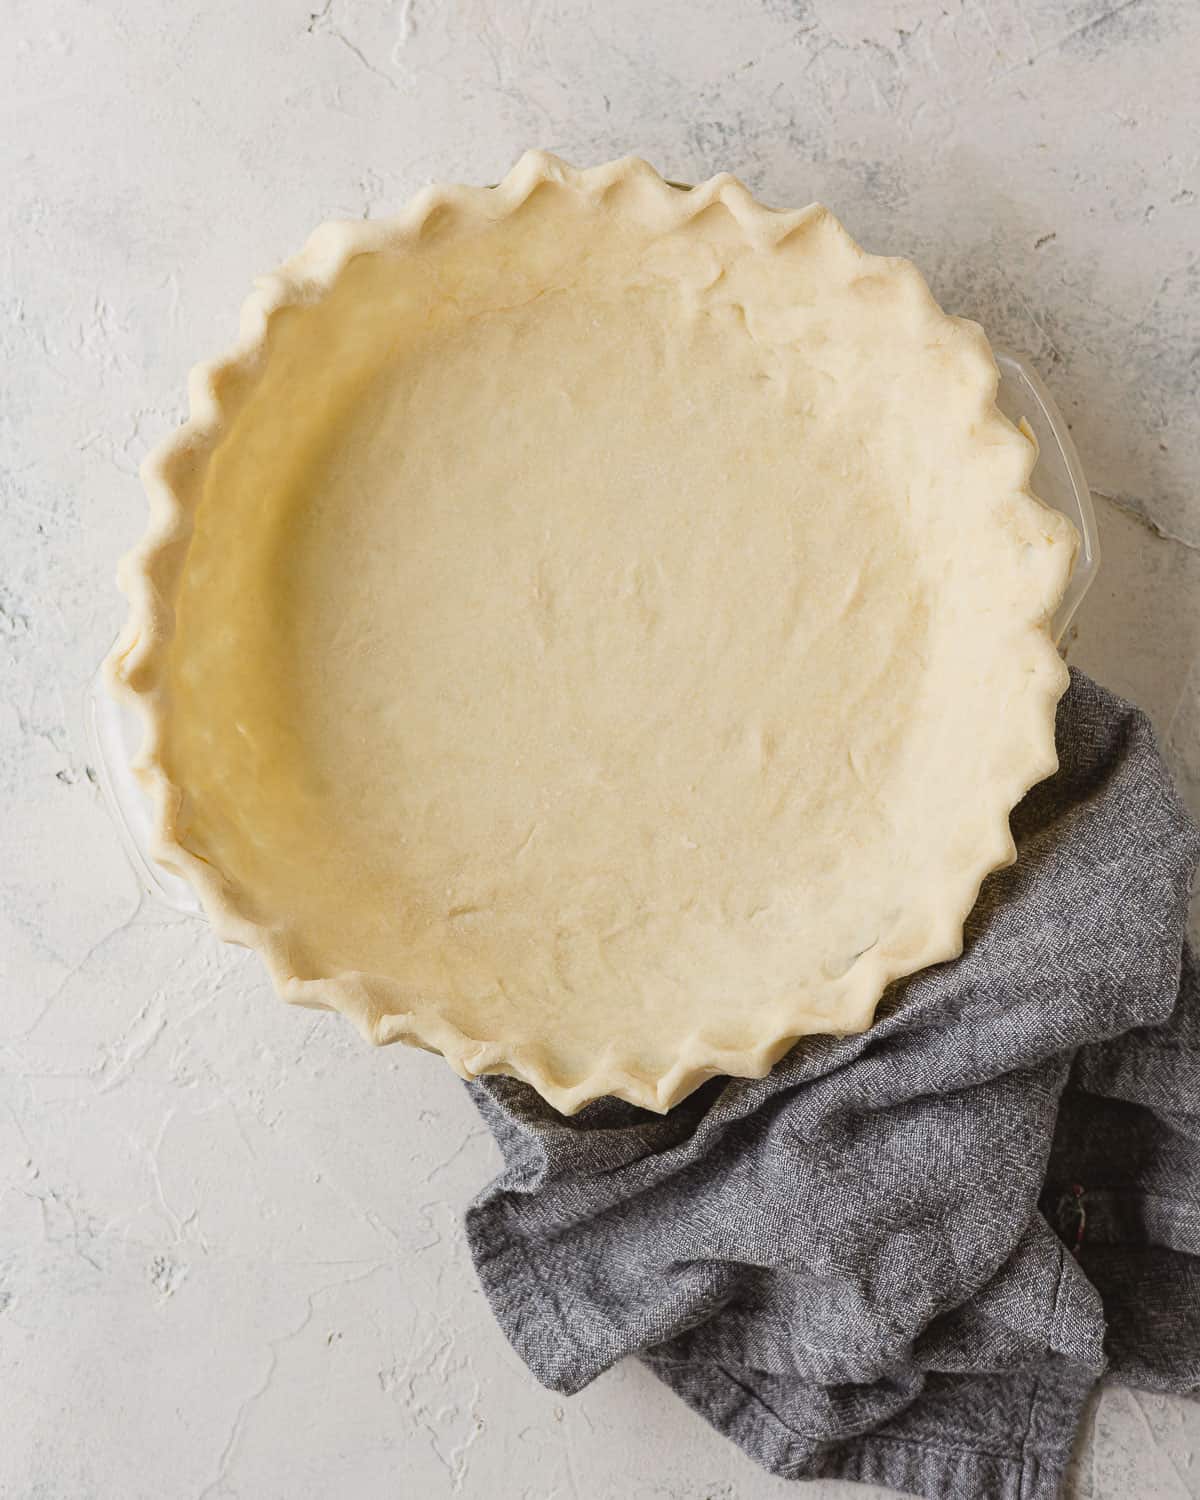 How to Keep Pie Crust from Burning